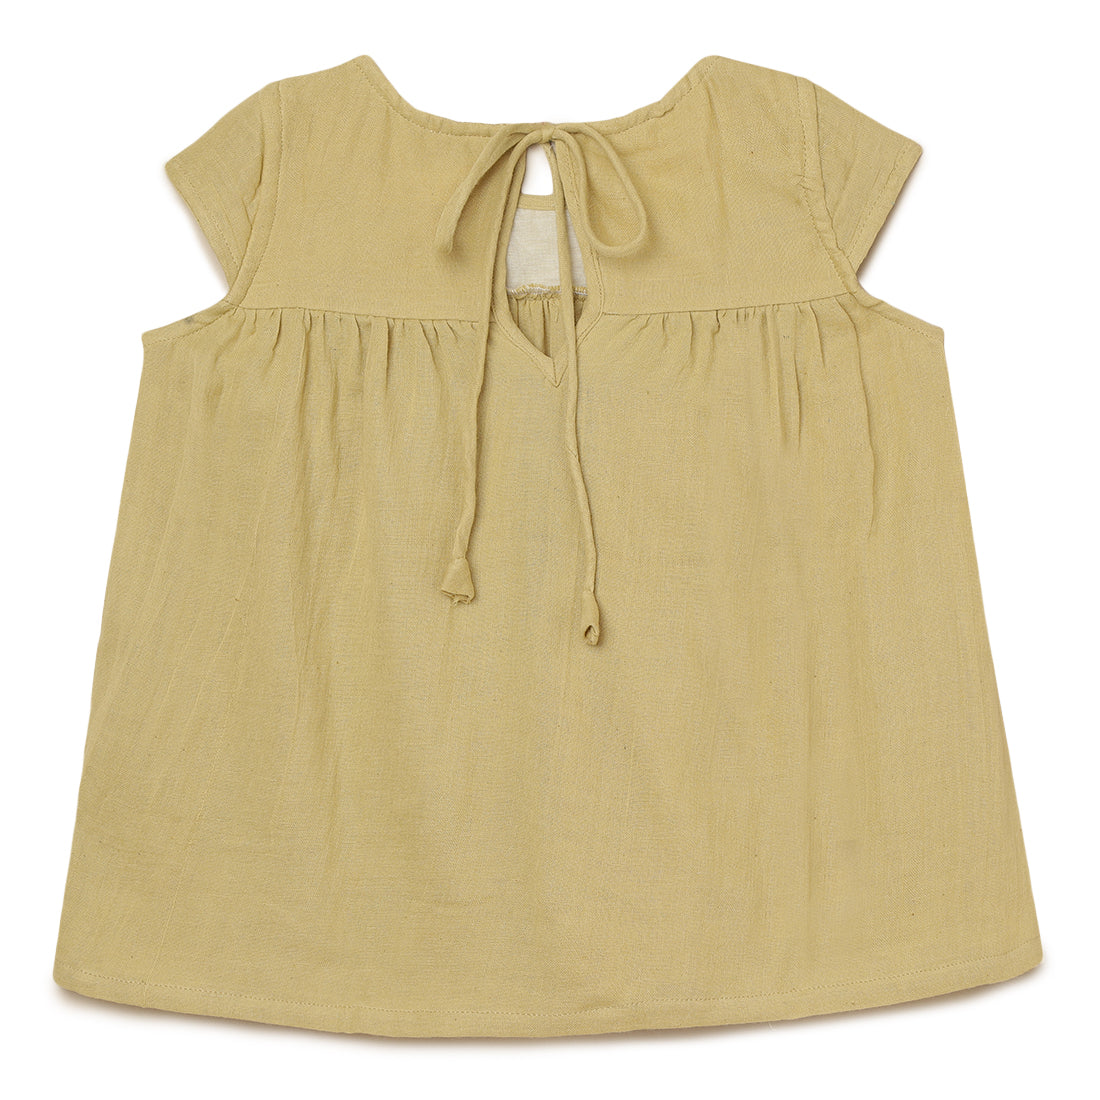 Girls Embroidered Top  - 2 yrs to 6 yrs  - Back